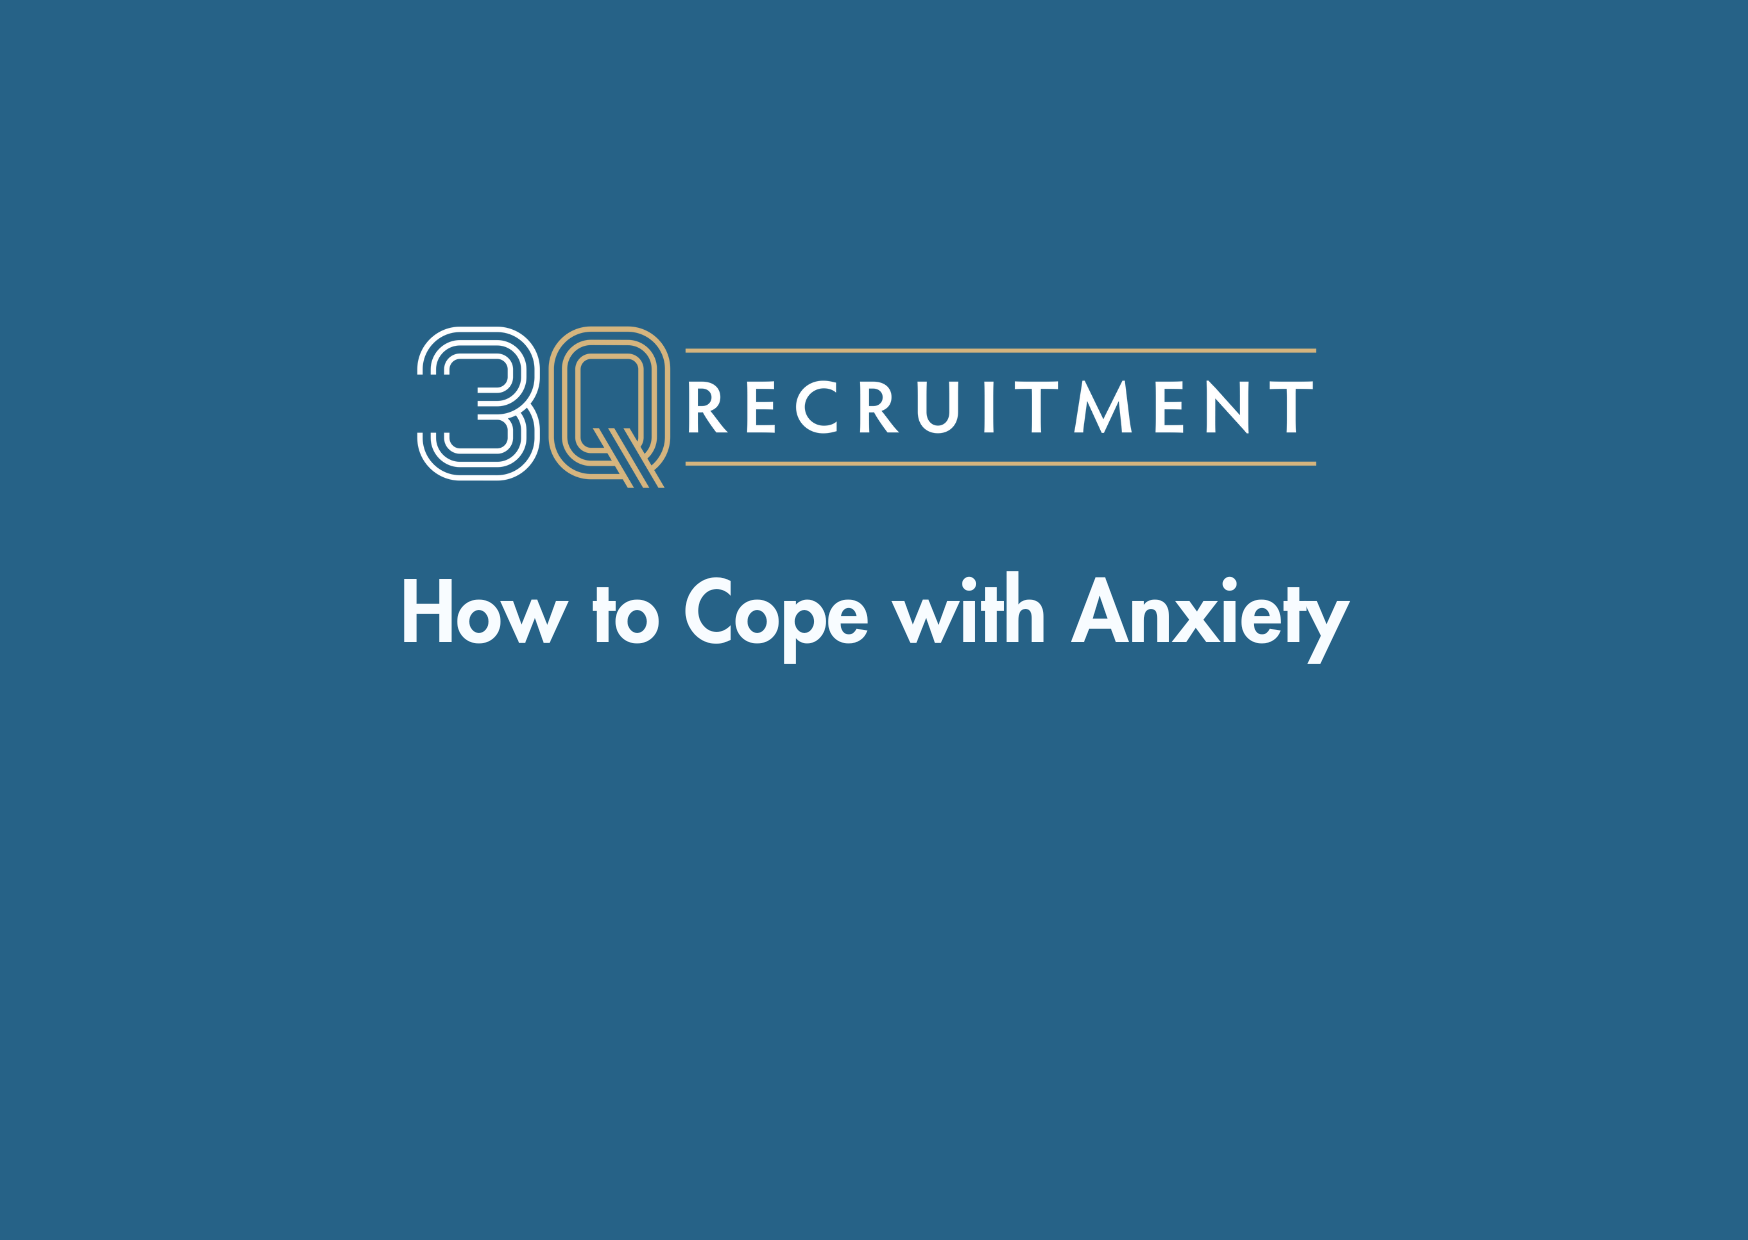 3Q Recruitment How to Cope with Anxiety